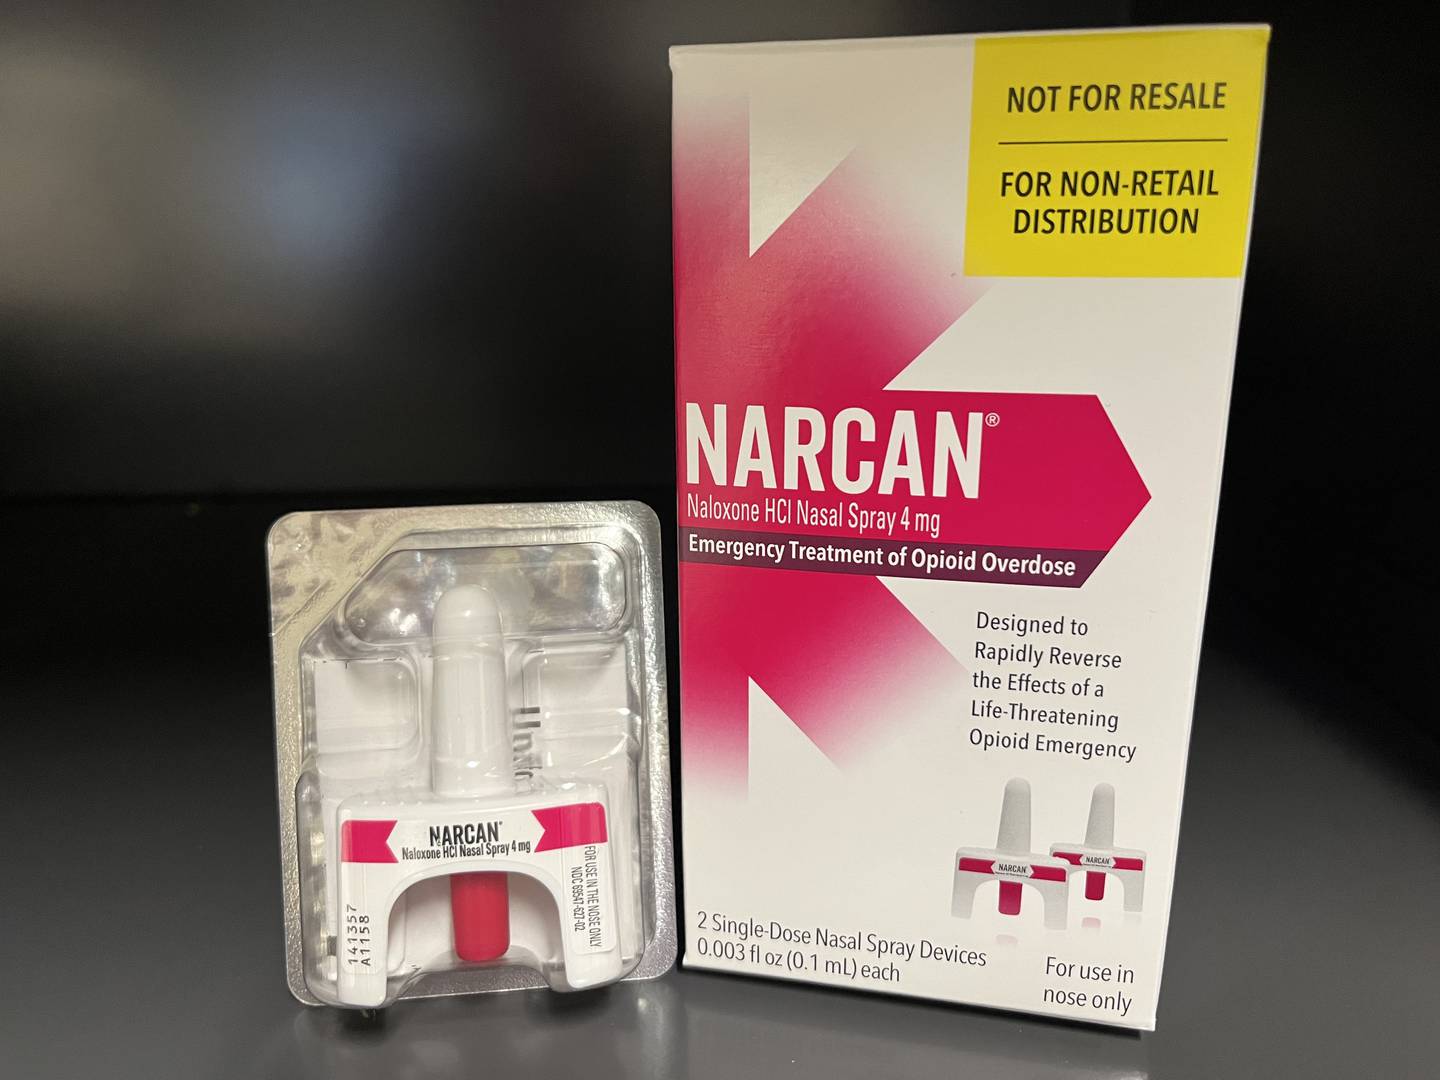 Naloxone, or Narcan, binds to opioid receptors in the brain and can reverse and block the effects of opioids. It can begin working within minutes to restore breathing, consciousness, and save a life.